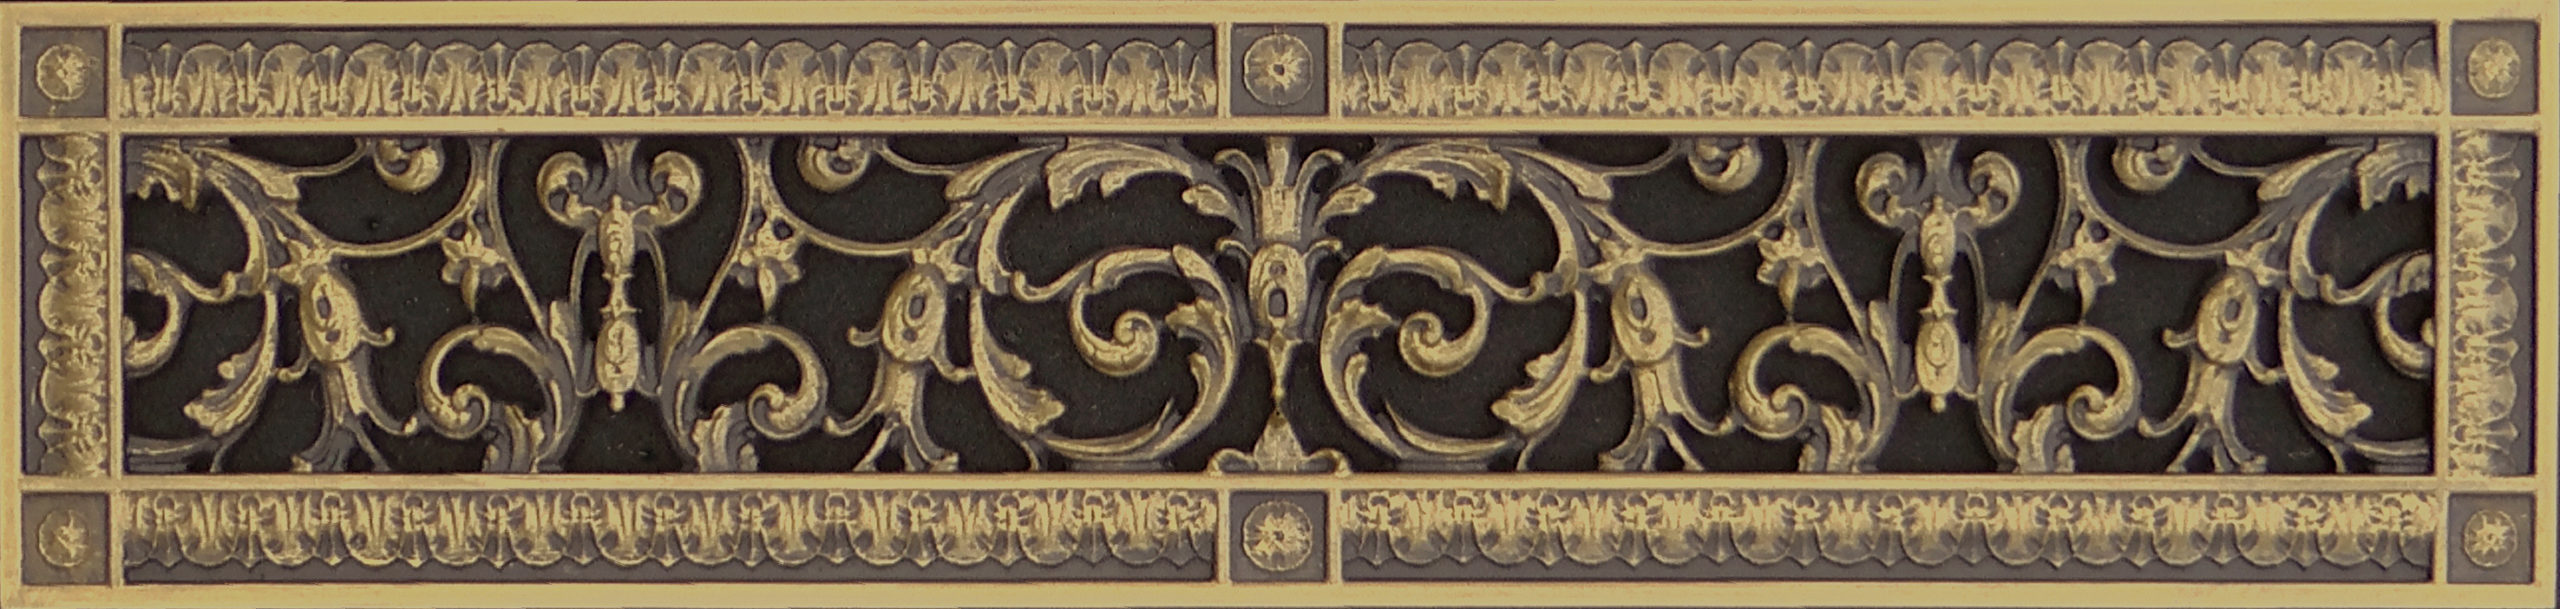 Decorative vent cover in Louis XIV style in antique brass finish